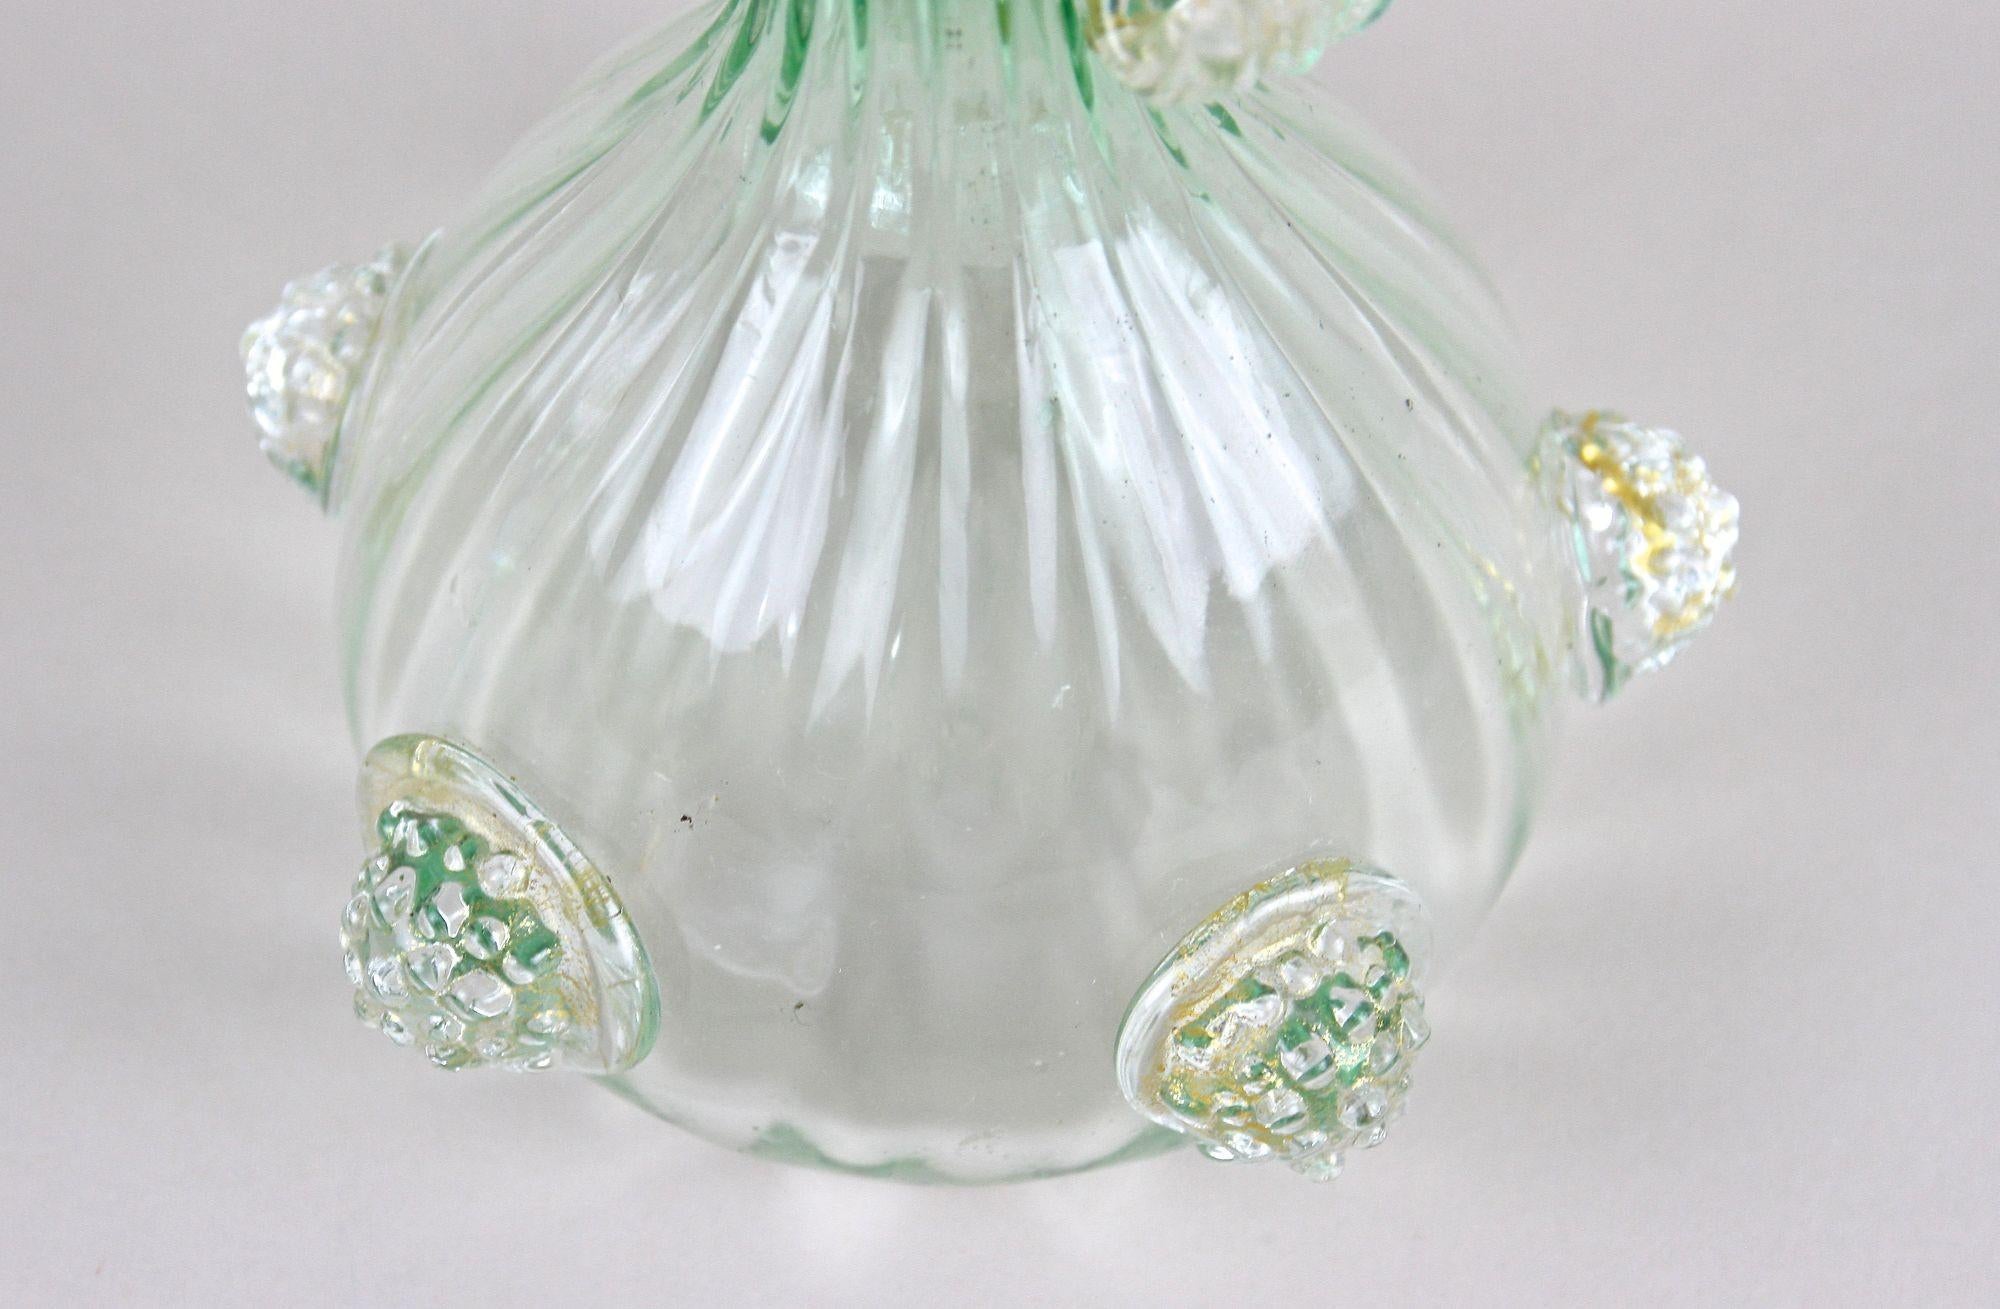 Green/ White Murano Glass Vase With 24k Gold Flakes by Fratelli Toso, IT ca 1930 For Sale 3